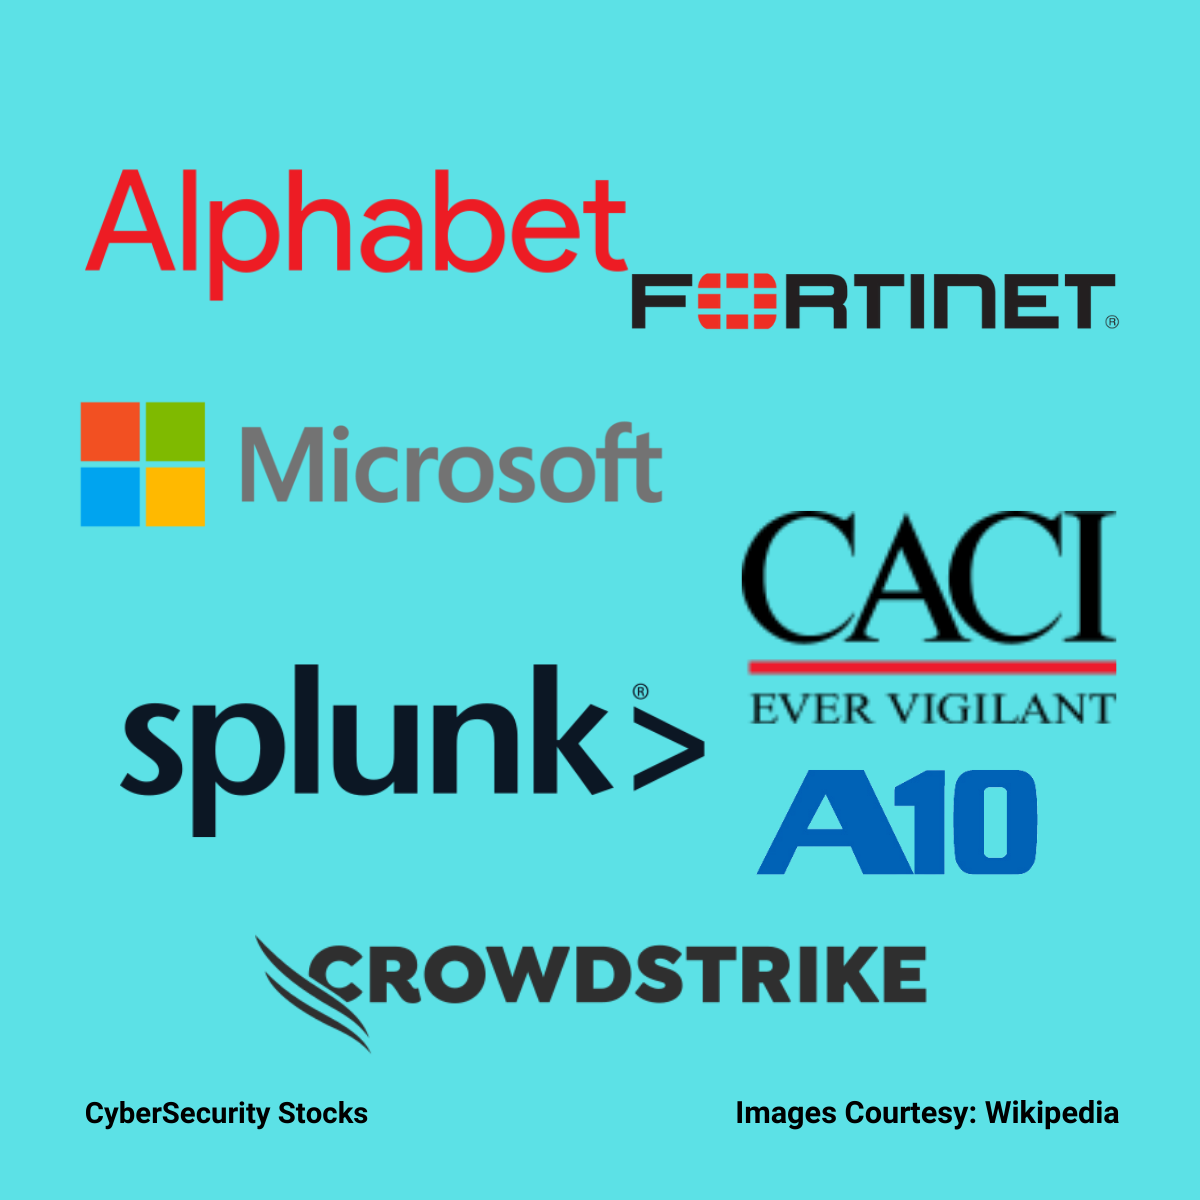 Cyber Security Stocks